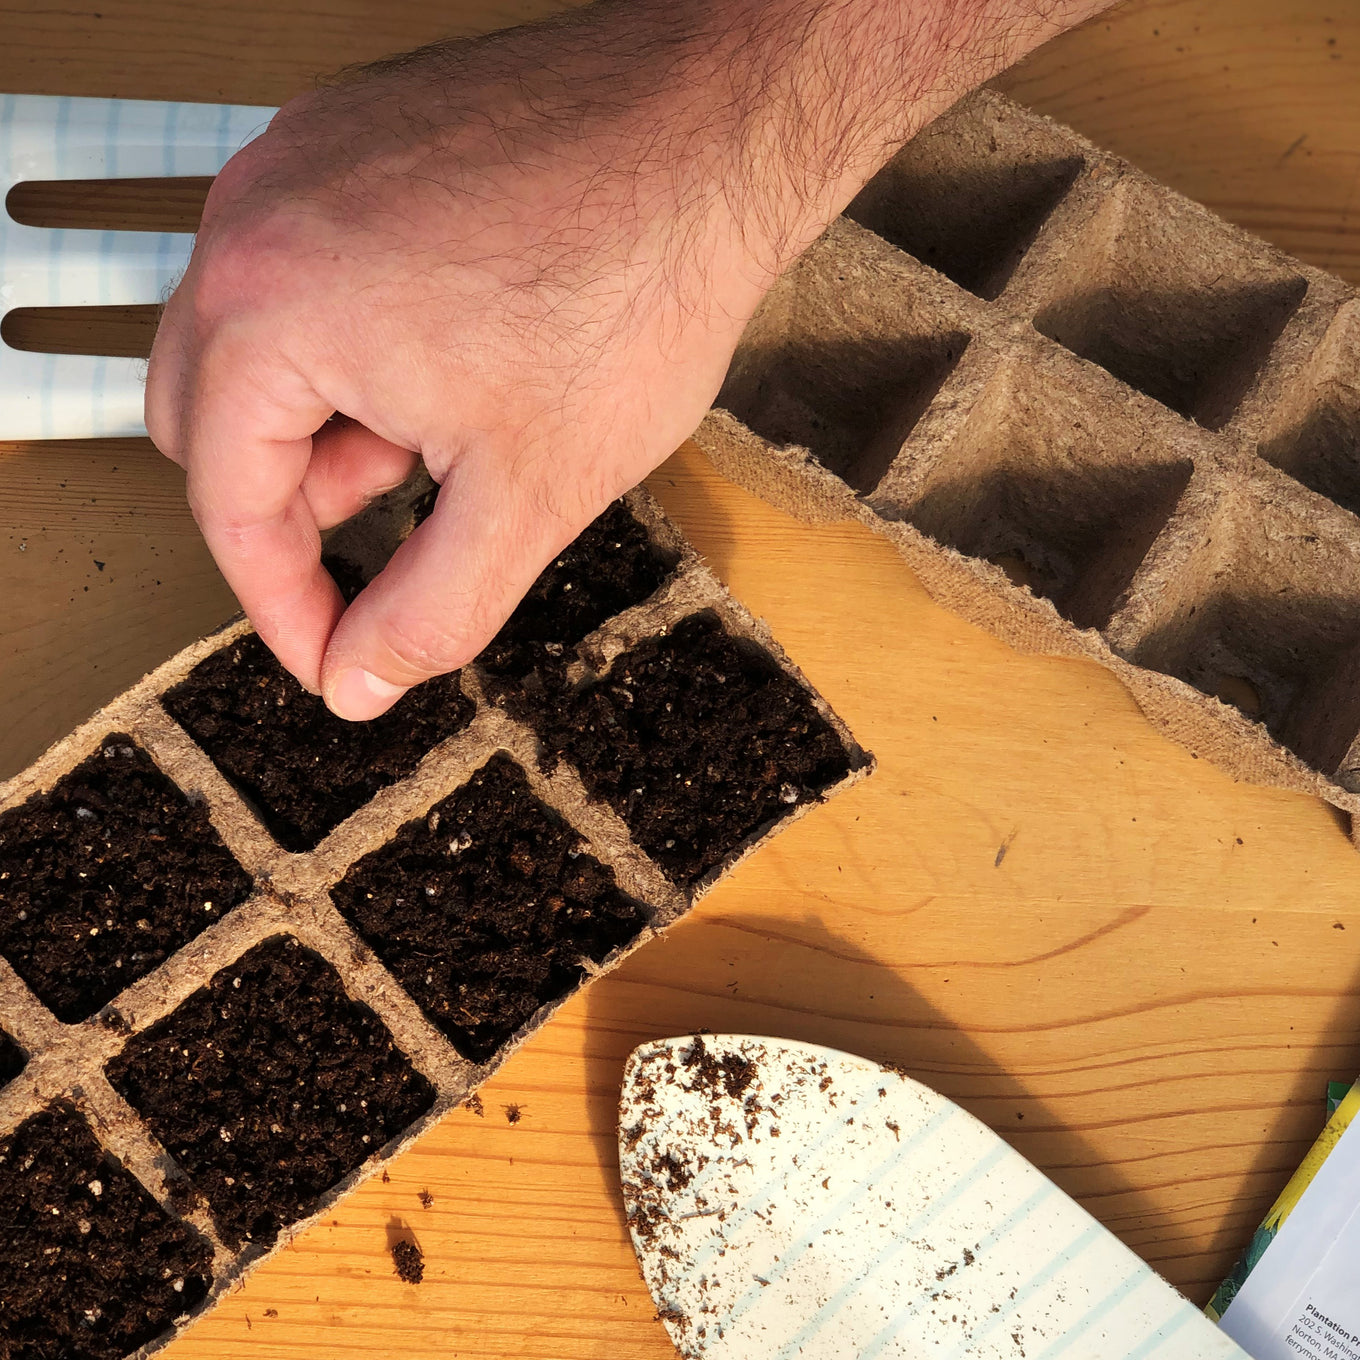 Plant Early Girl Tomato seeds into biodegradable Jiffy peat strip trays which tear apart easily to make for easy transplanting outdoors. Trays help prevent root shock.